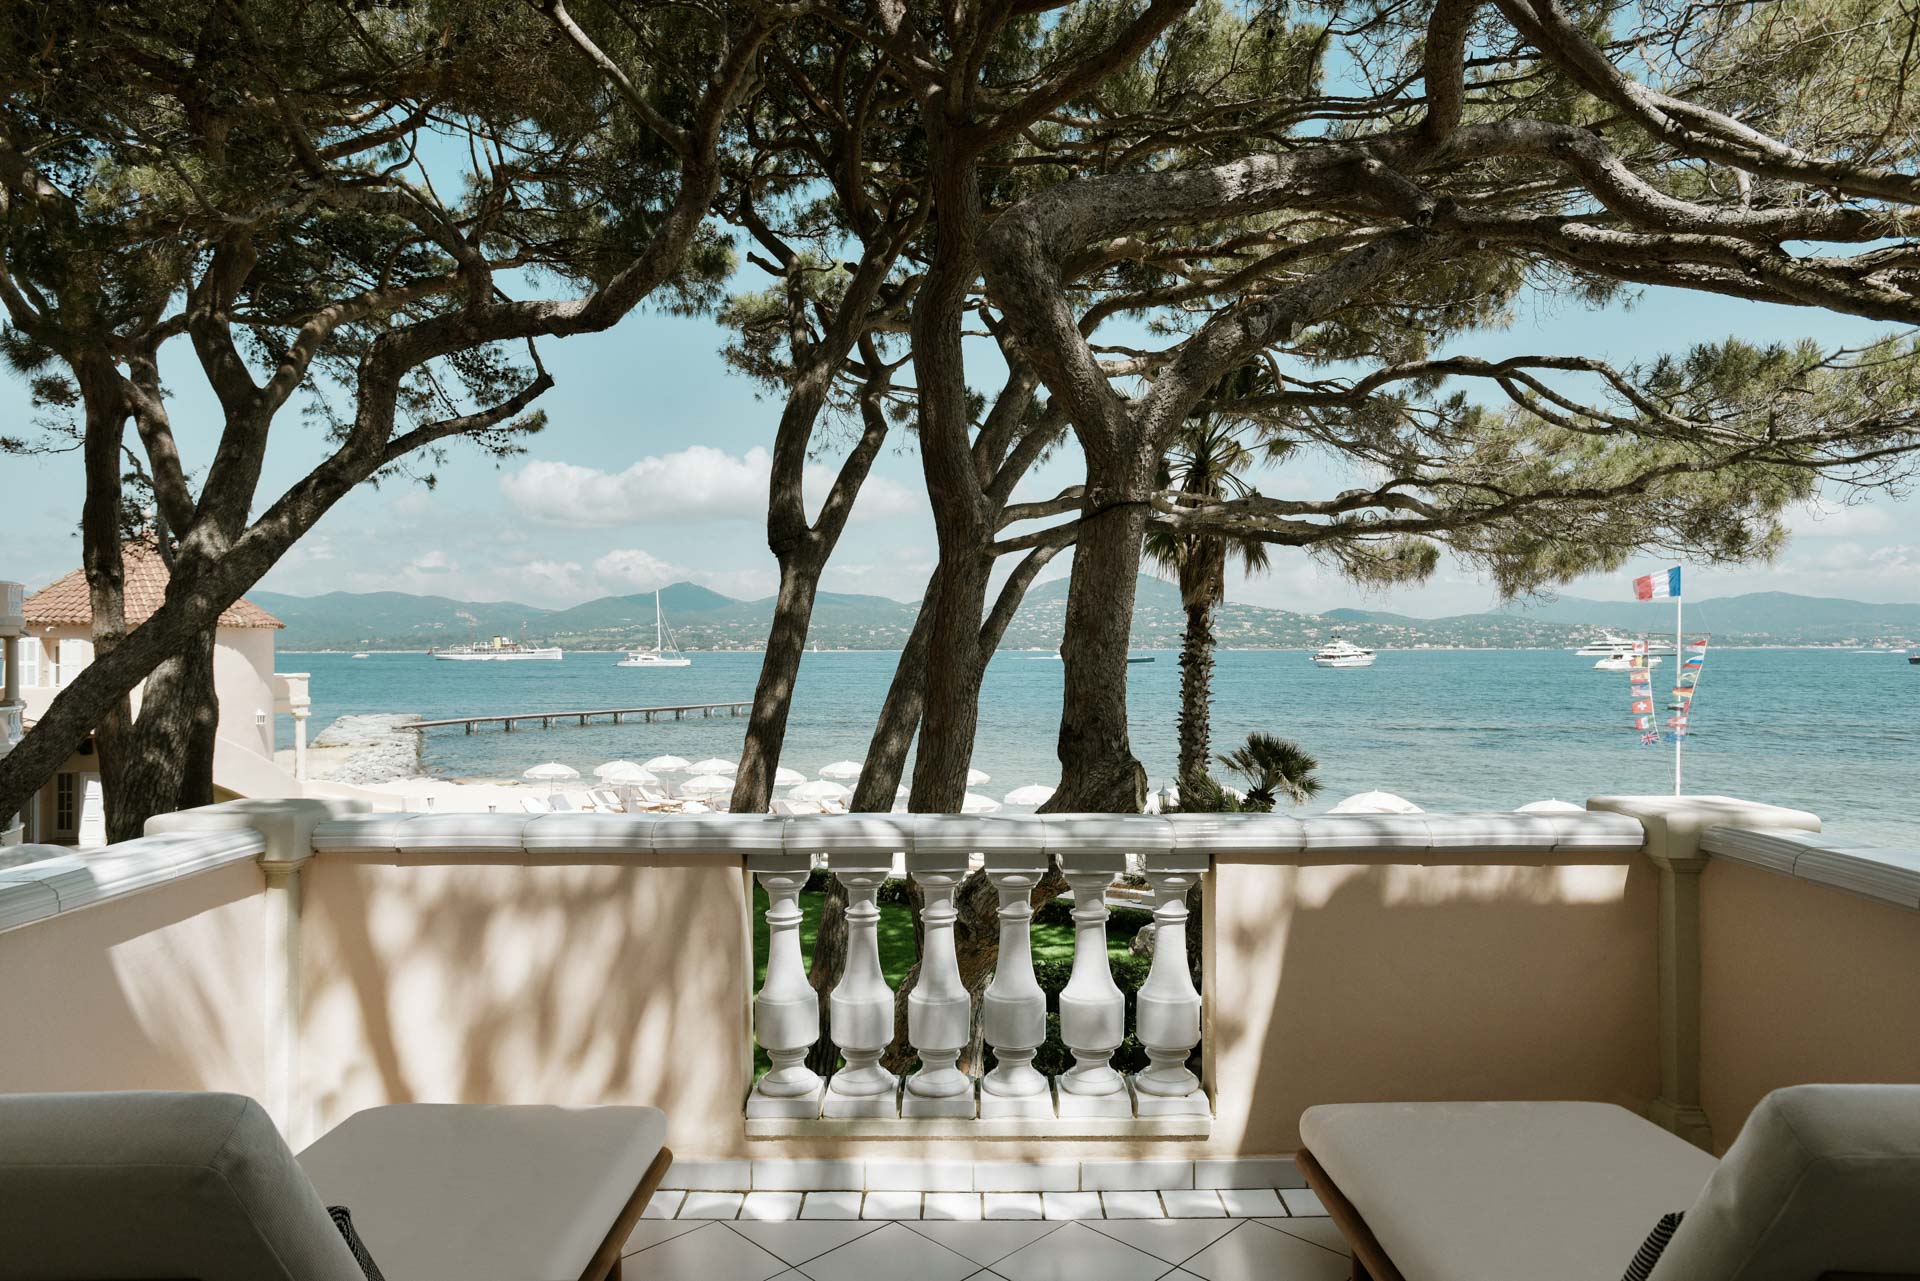 Cheval Blanc St-Tropez - French Riviera Hotels - St. Tropez, France -  Forbes Travel Guide